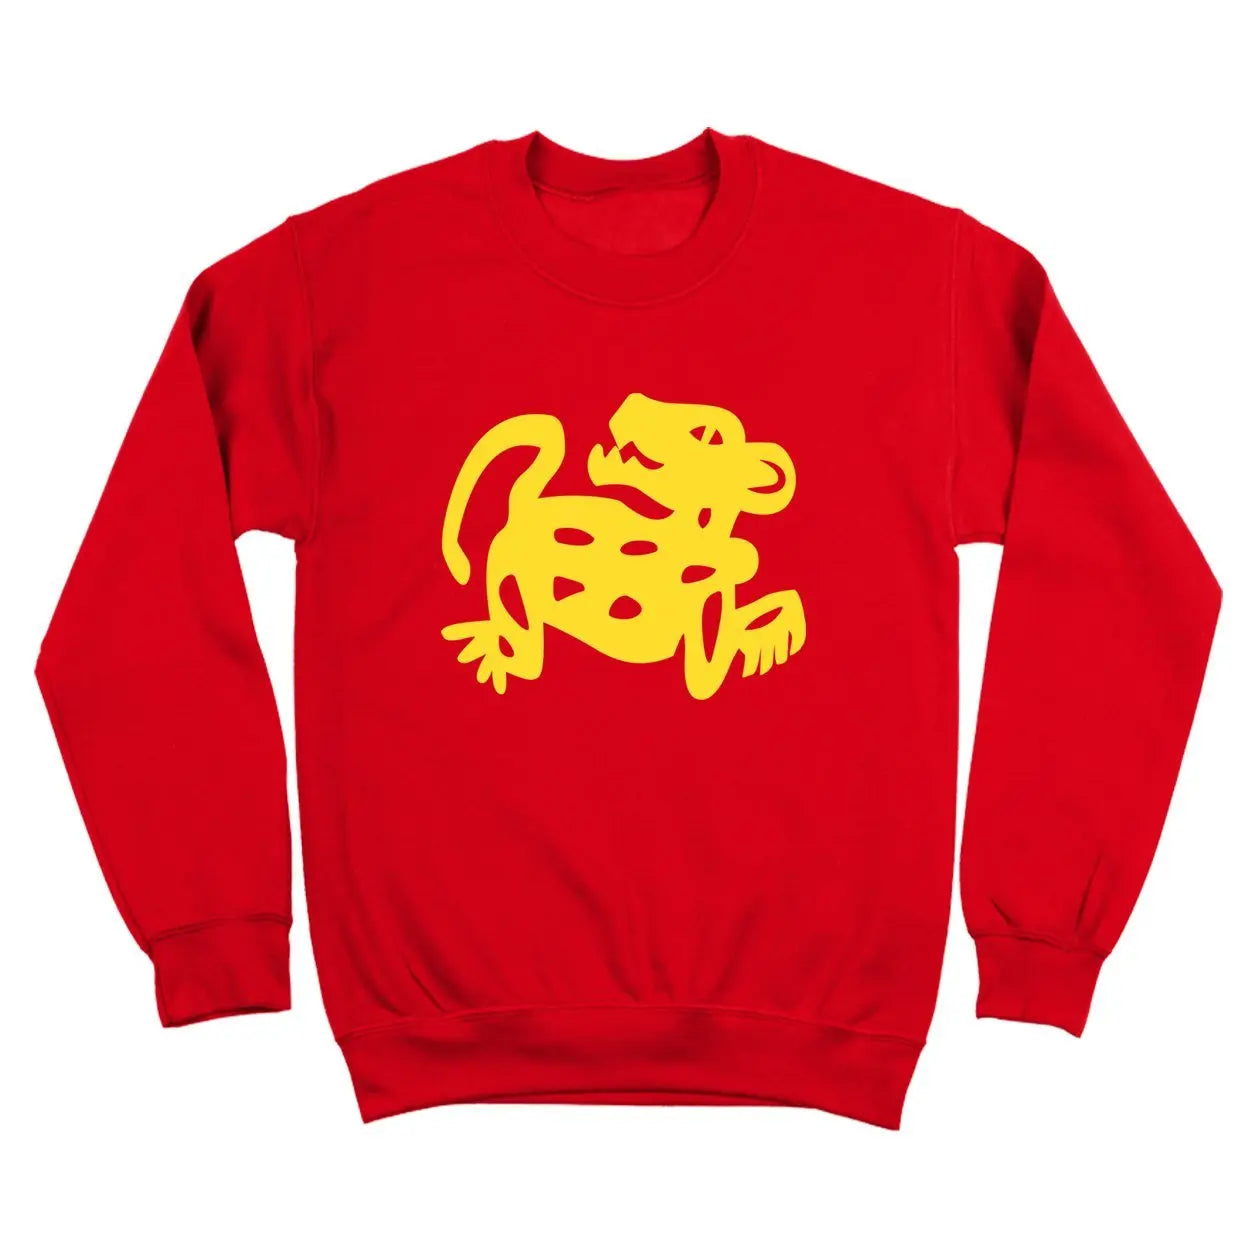 Red Leopards Team Costume Tshirt - Donkey Tees